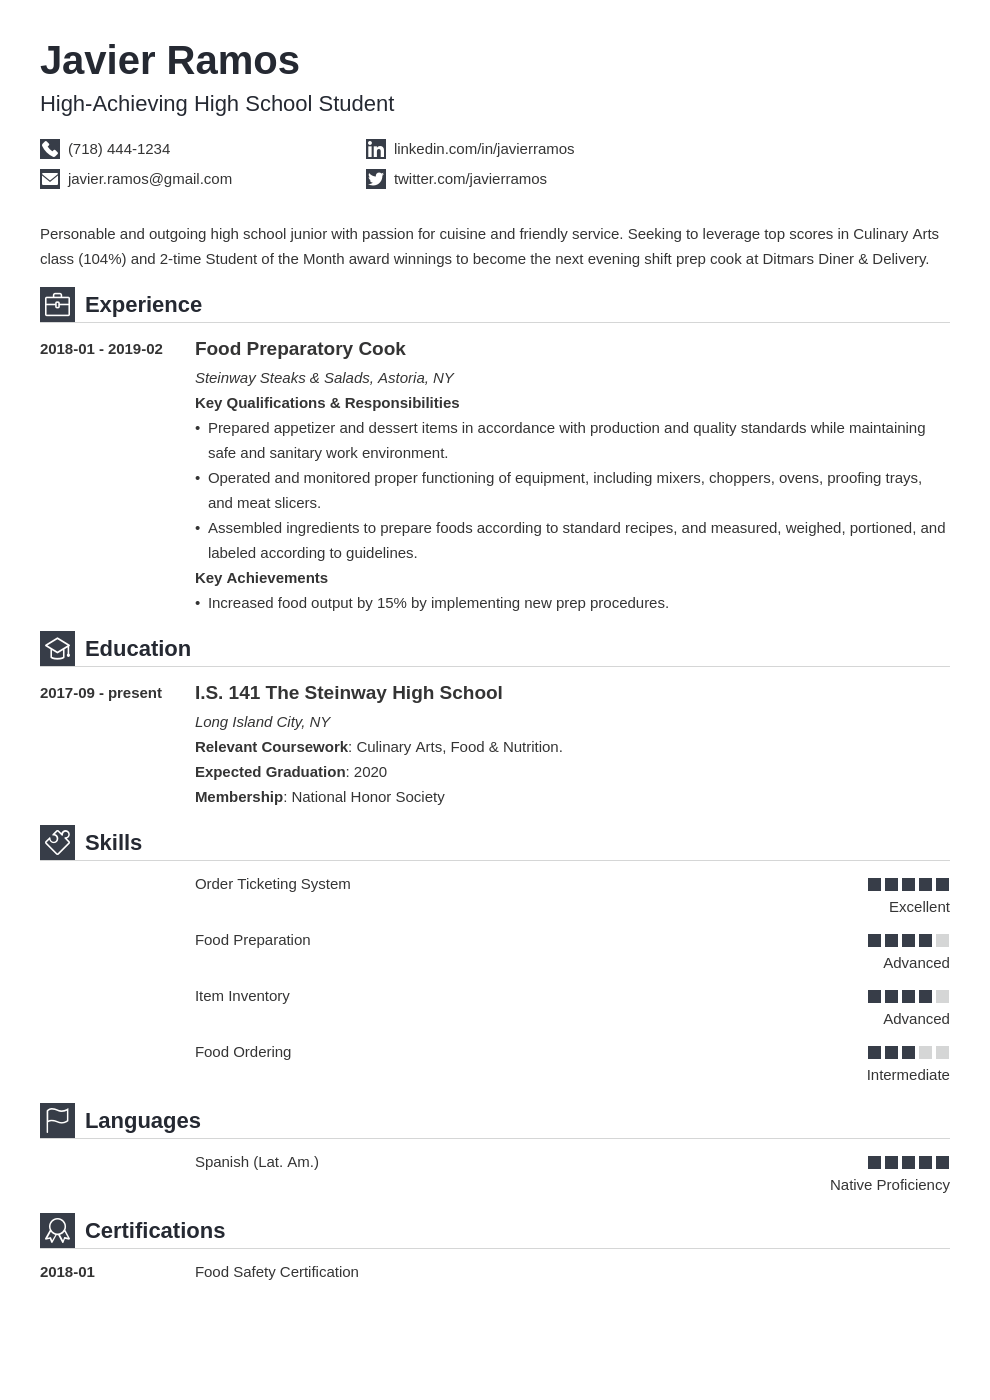 Resume writing for high school student 1st